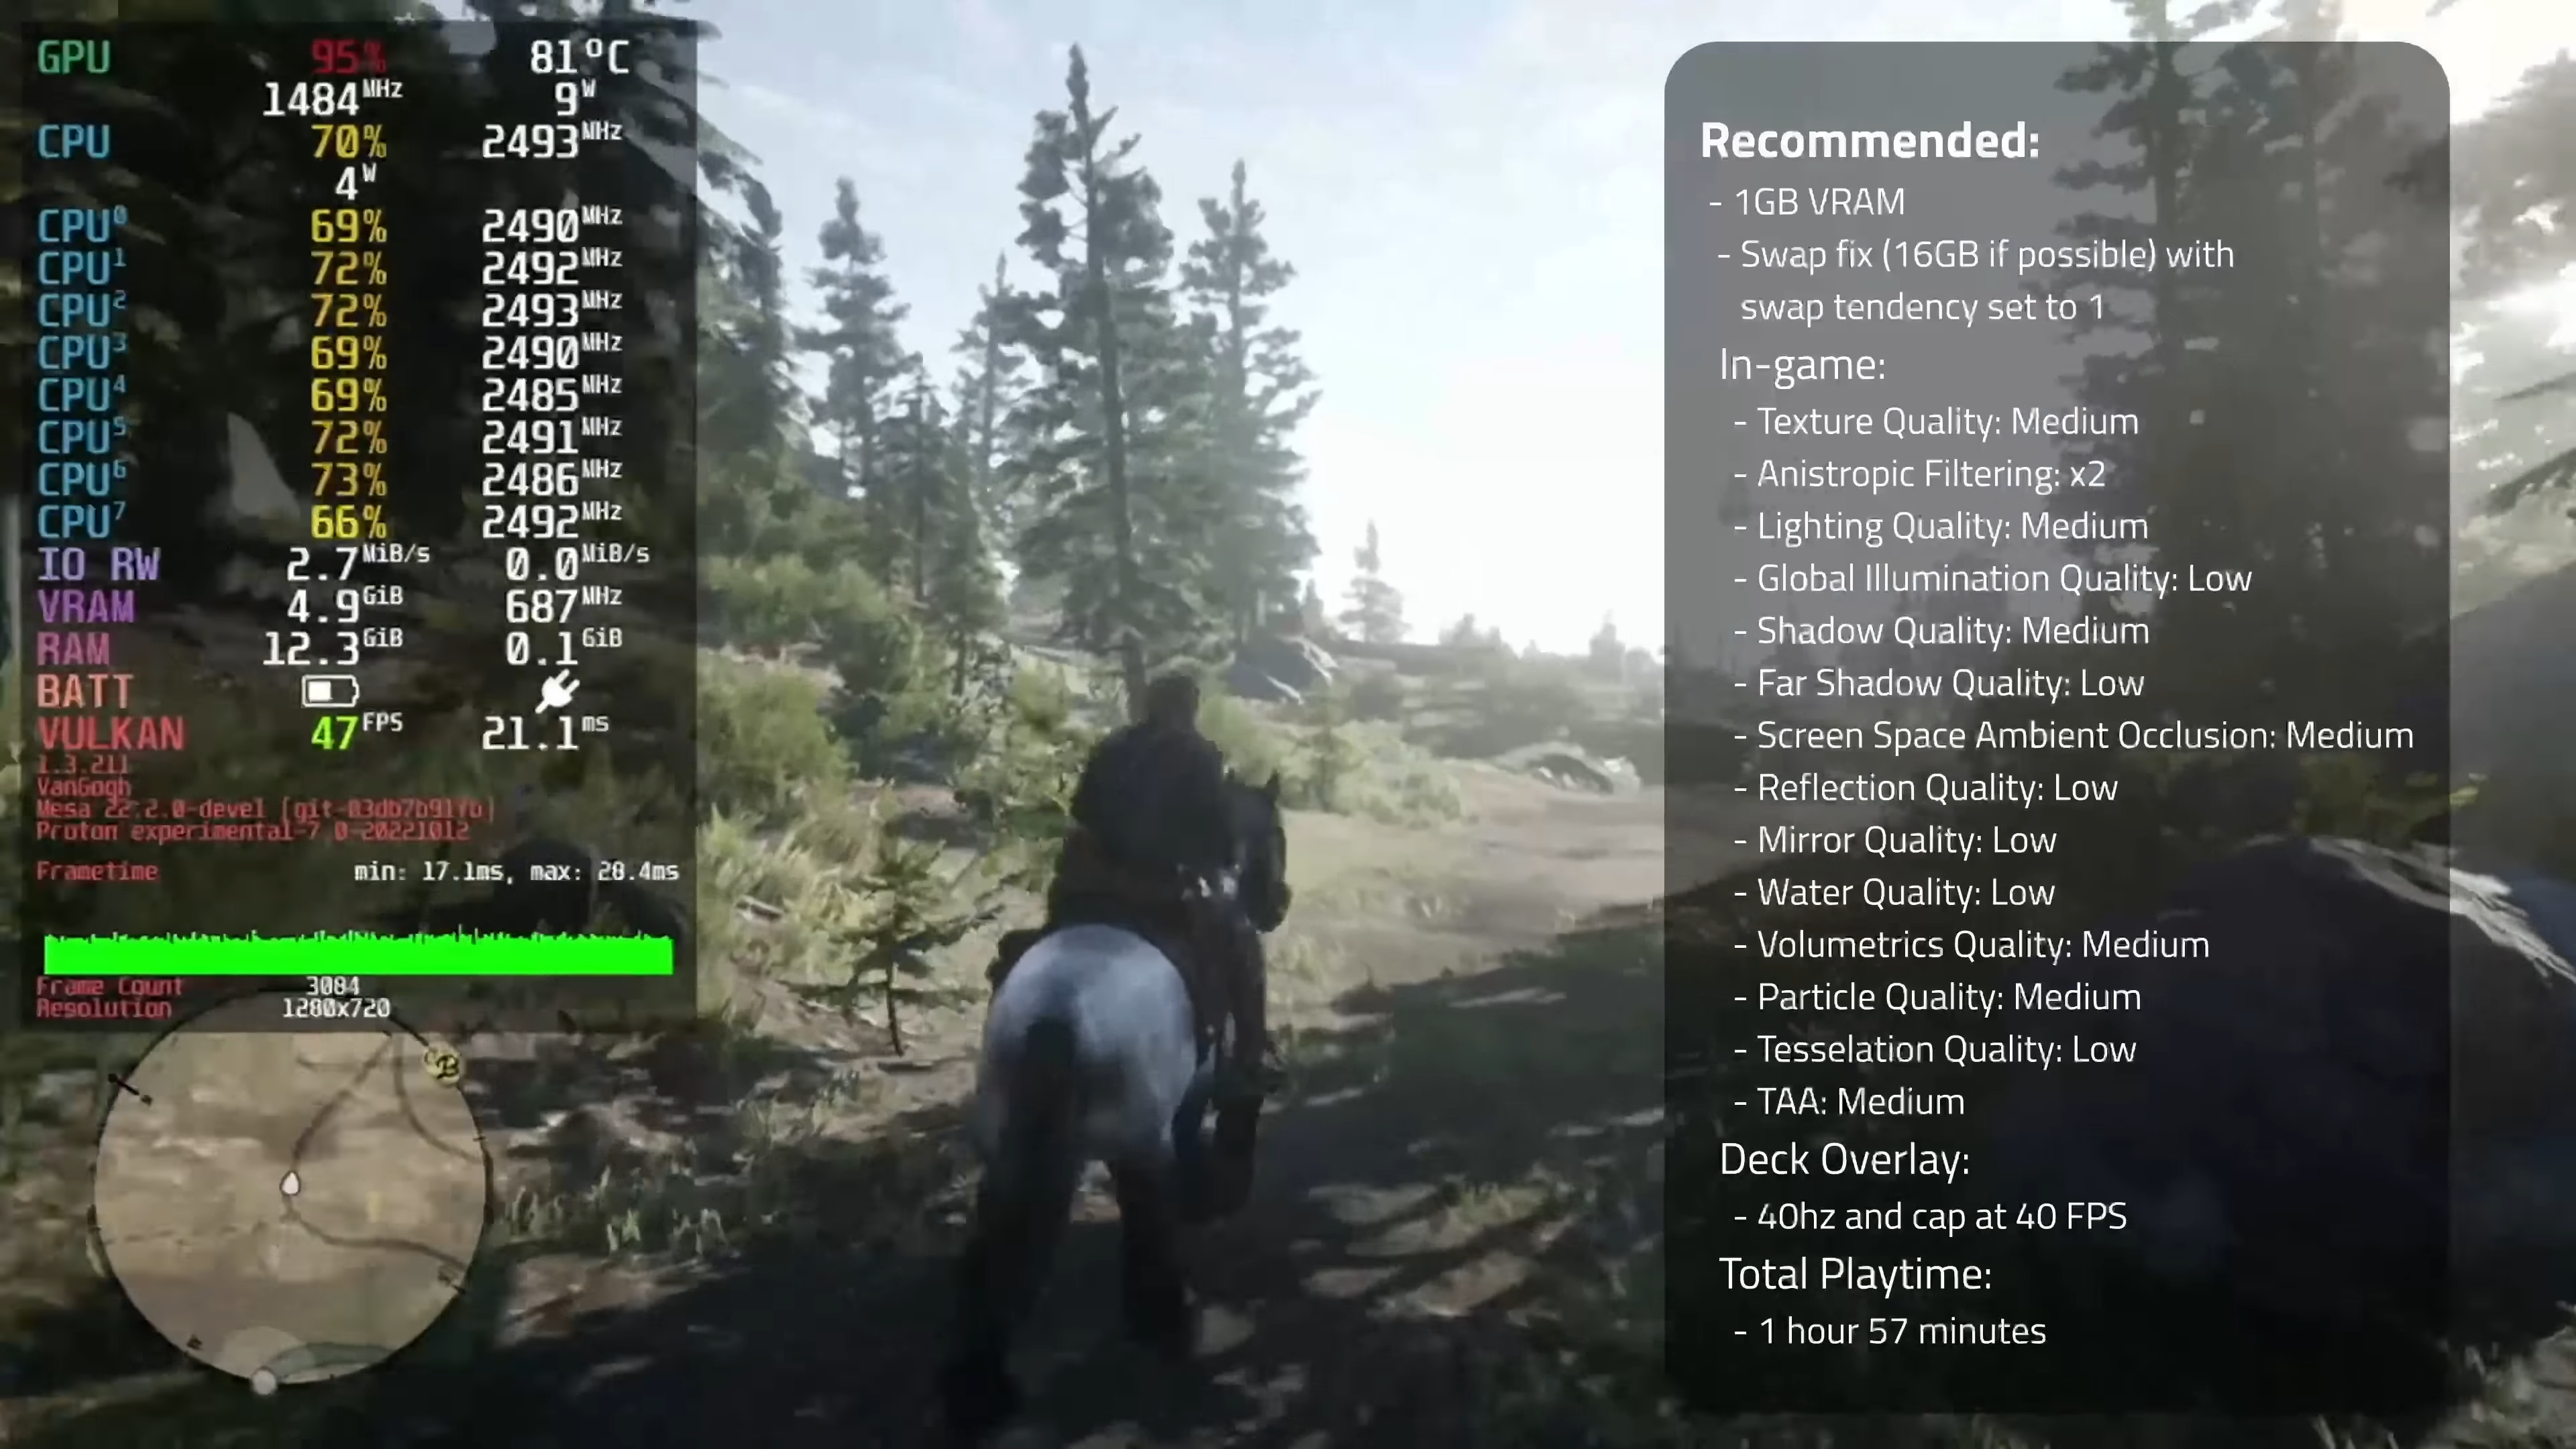 Red Dead Redemption 2 Steam Deck Best Settings